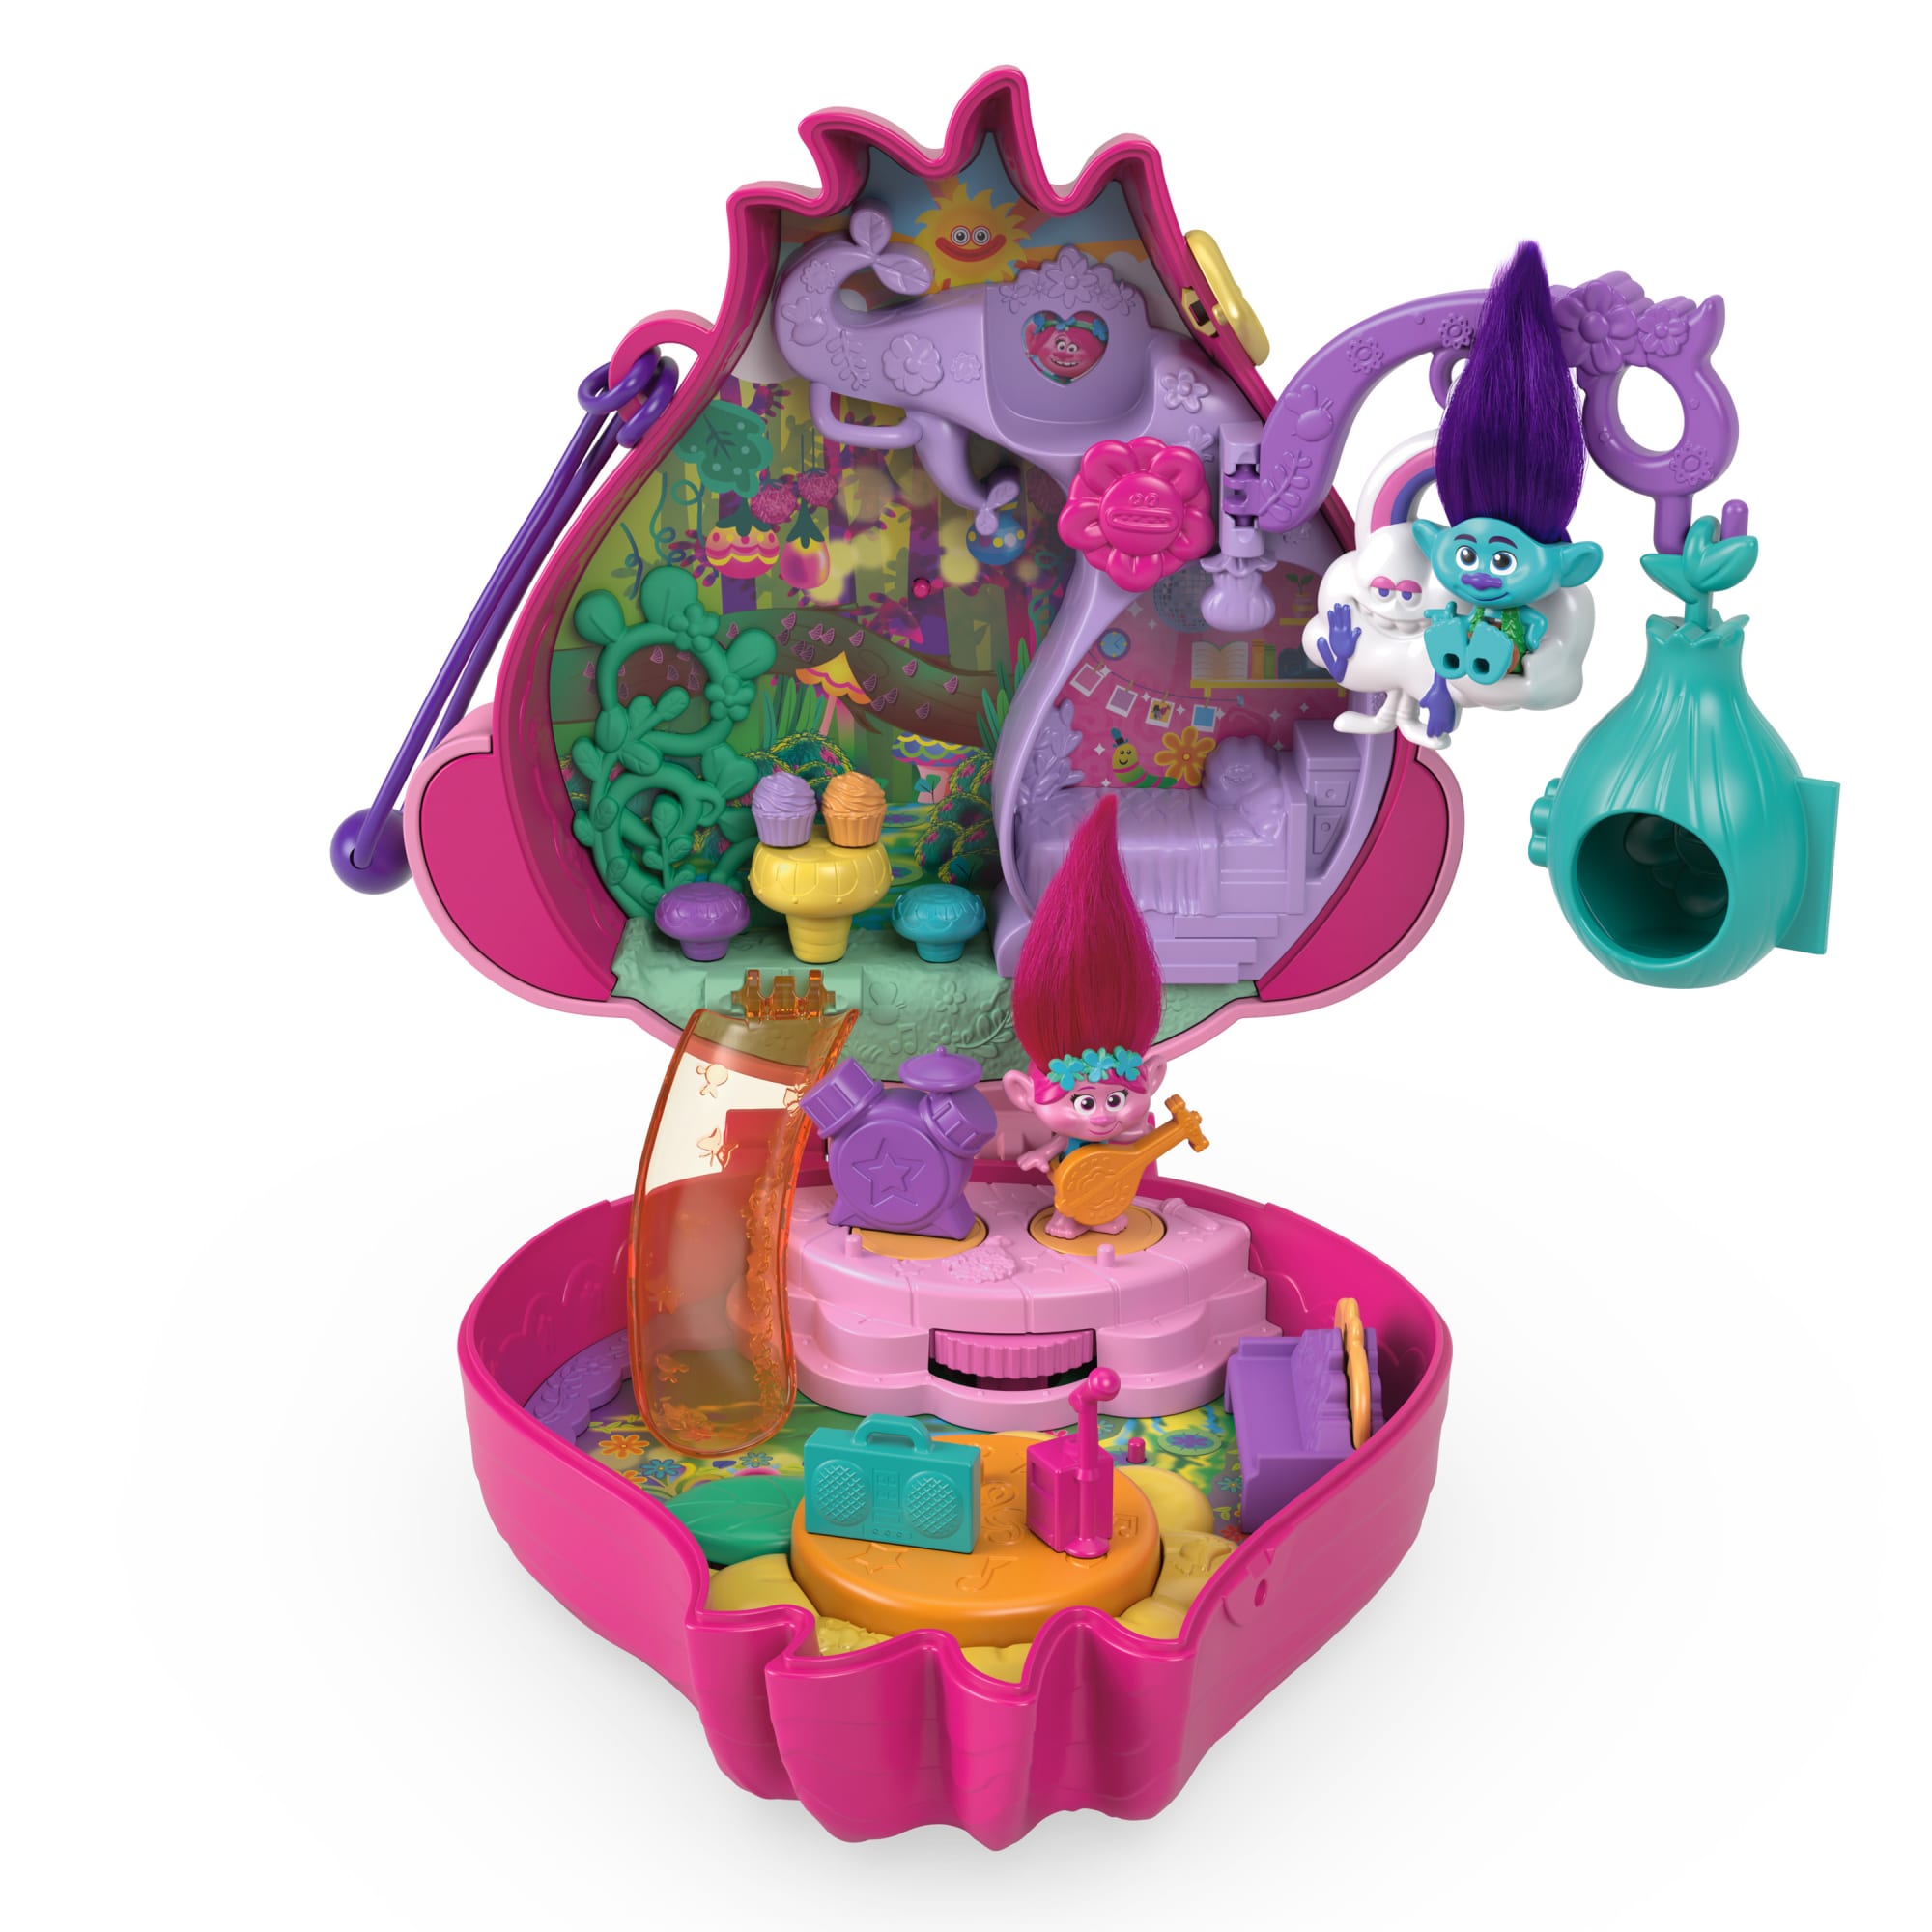 Polly Pocket Playset  DreamWorks Trolls Compact with 2 Dolls